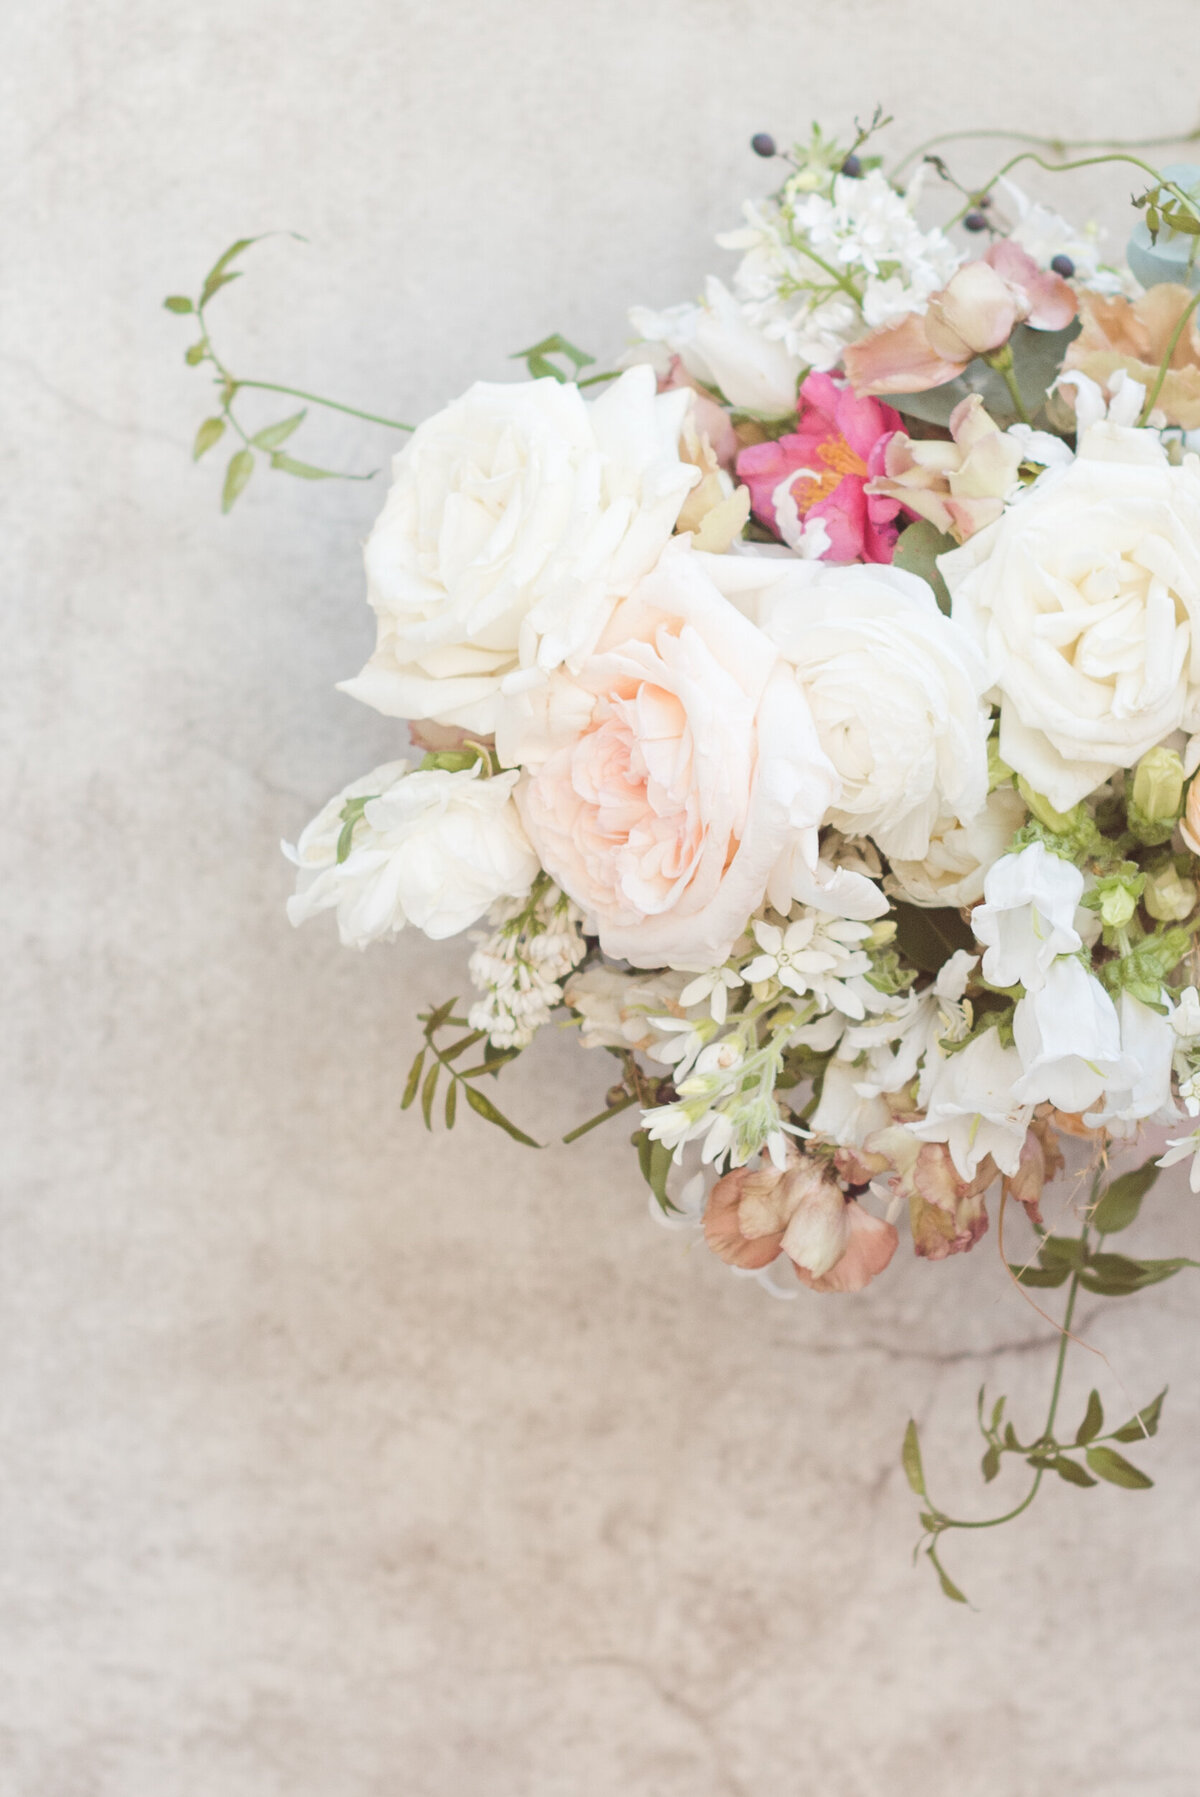 A timeless arrangement of fresh florals to create a dreamy accessory to any luxury wedding